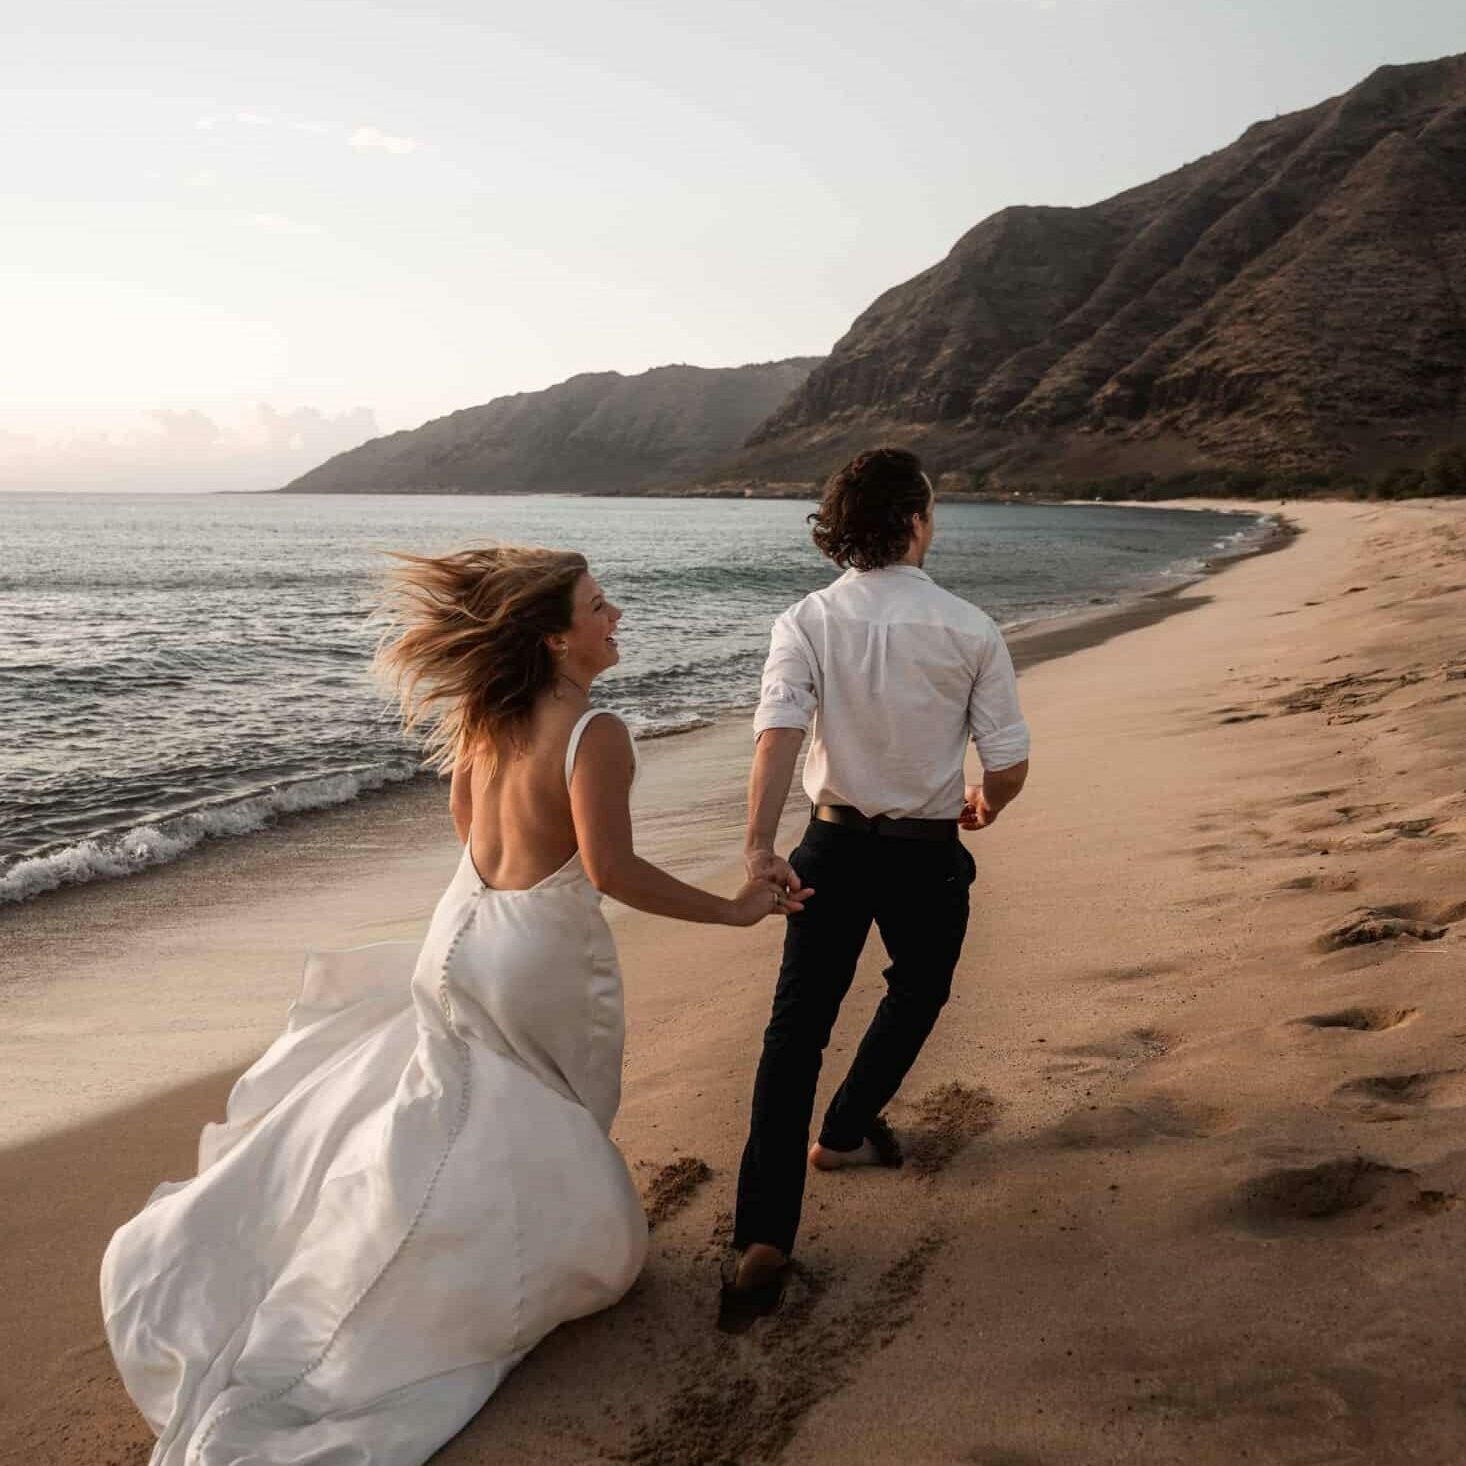 A joyful bride in a flowing white dress and a groom in a white shirt and black pants holding hands while walking on a sandy beach, with the bride's hair blowing in the wind and scenic mountains in the background